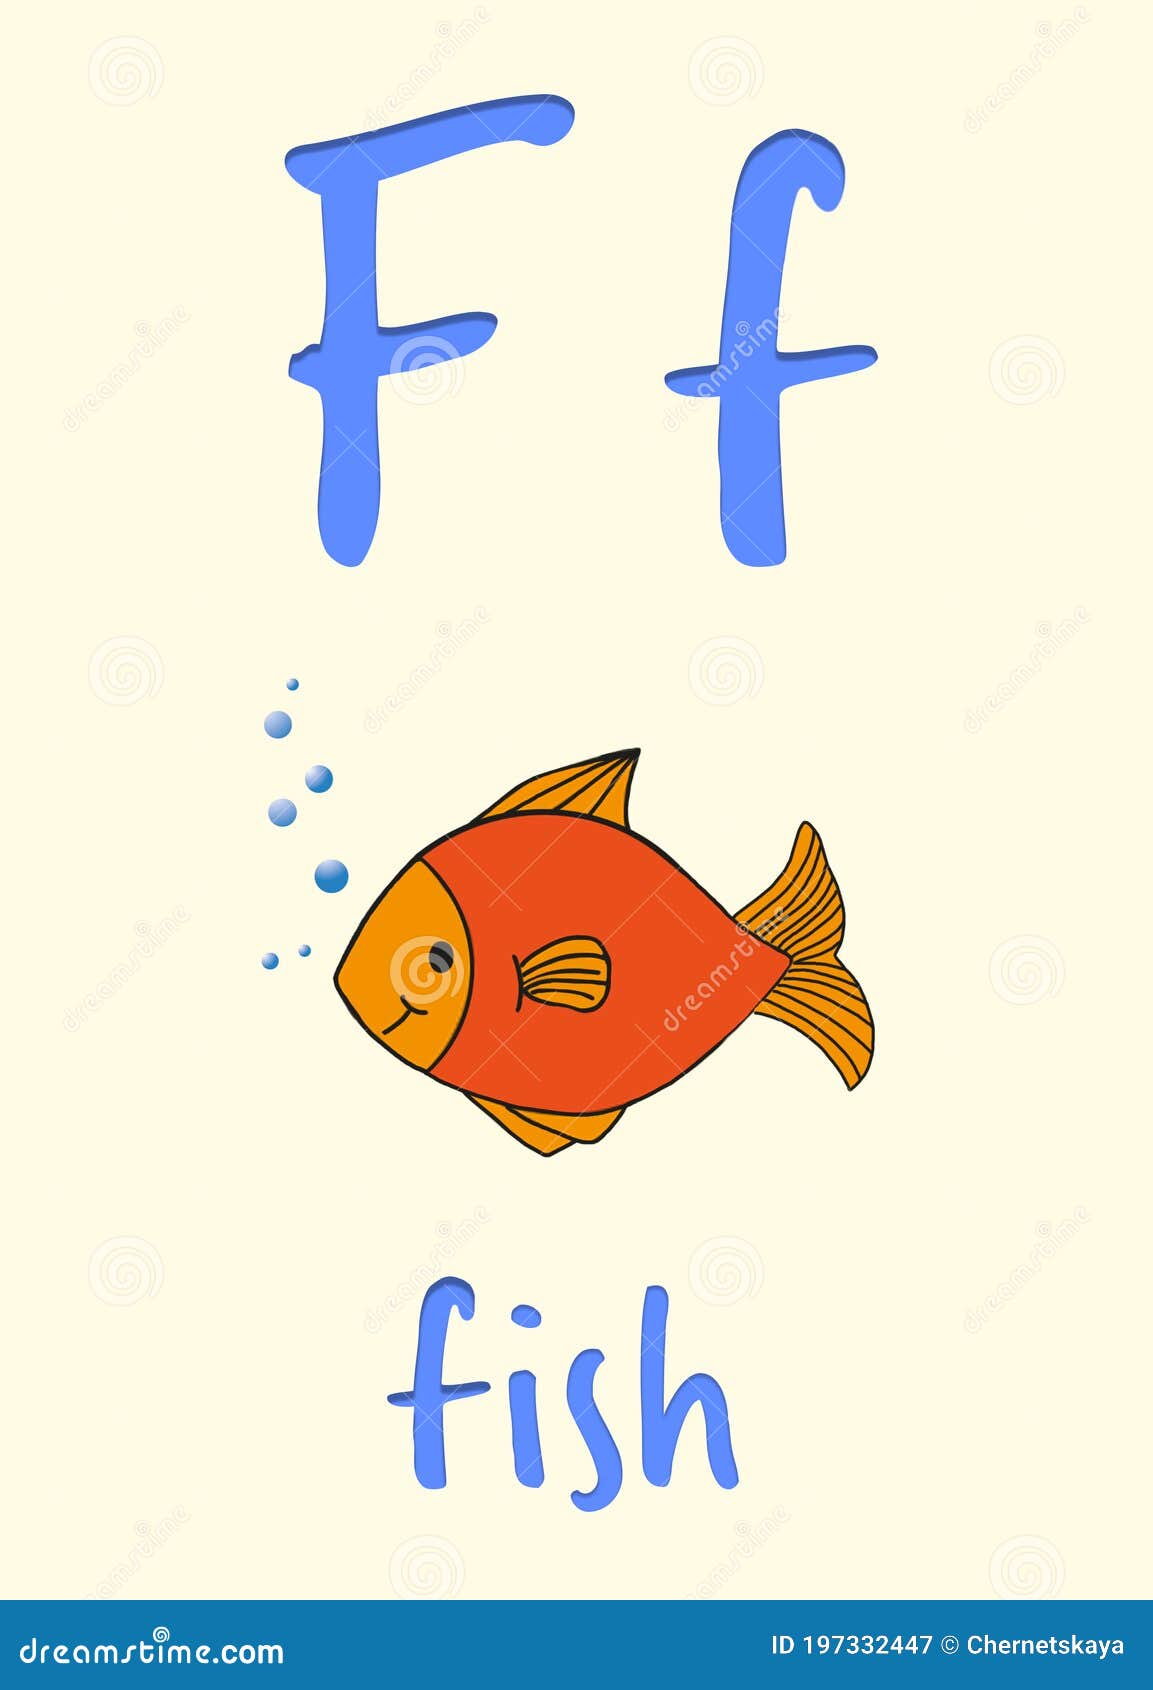 Learning English Alphabet. Card with Letter F and Fish